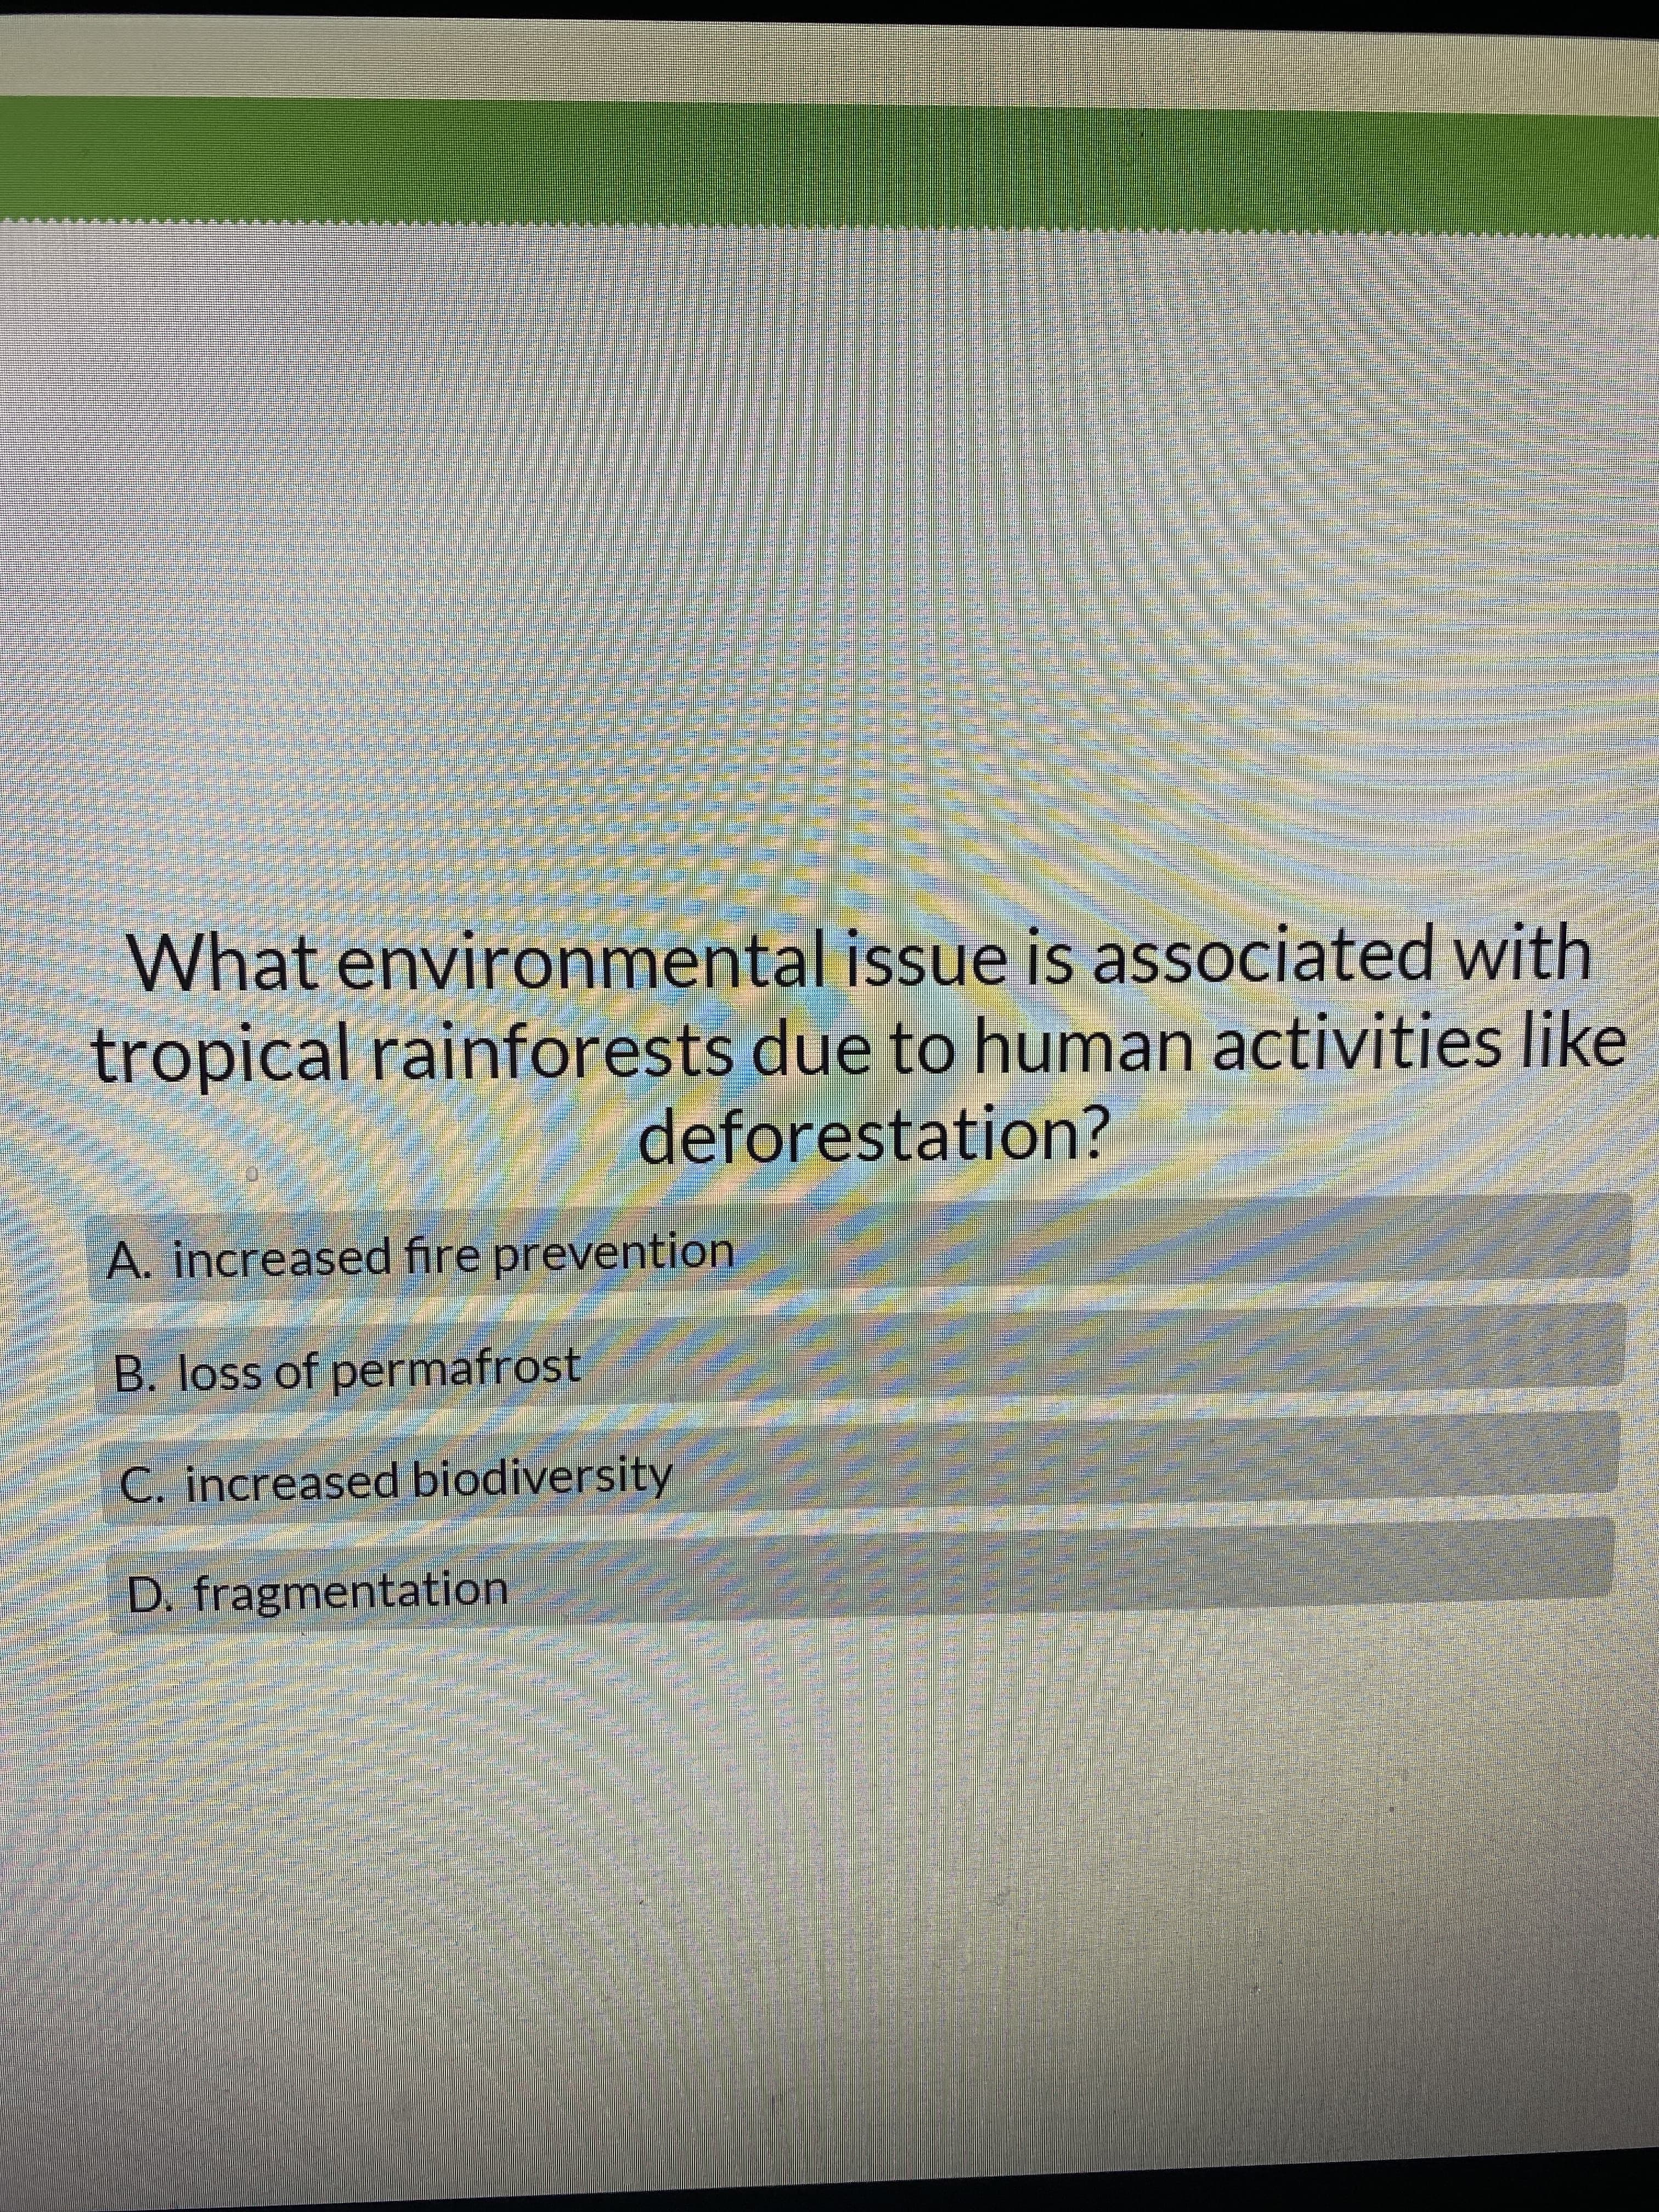 What environmental issue is associated with
tropical rainforests due to human activities like
deforestation?
A. increased fire prevention
B. loss of permafrost
C. increased biodiversity
D. fragmentation